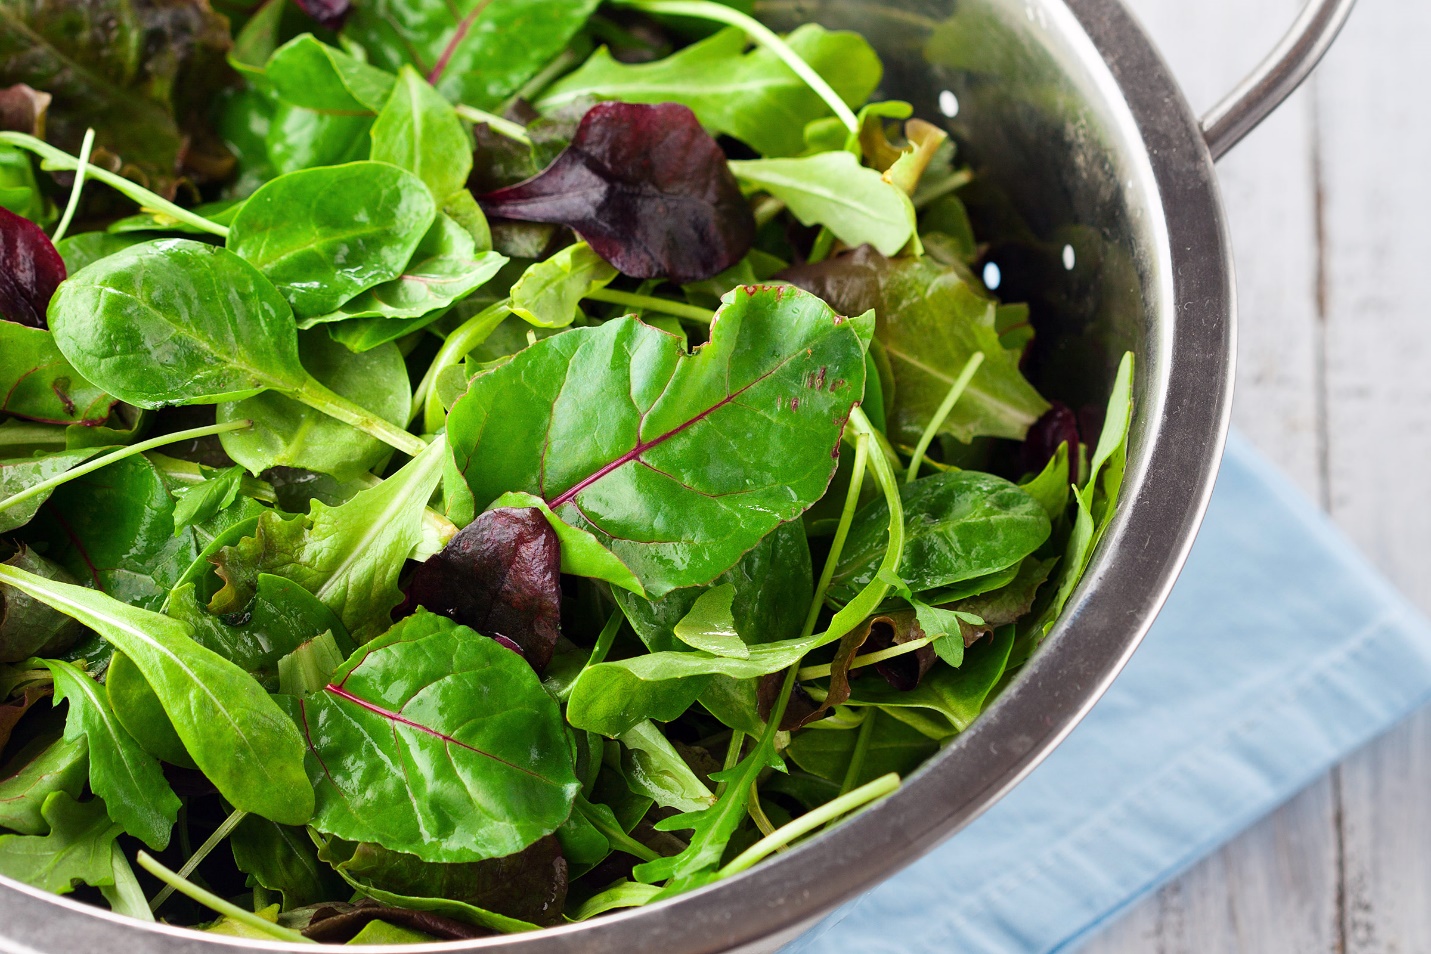 Green leafy vegetables help fight cancer.